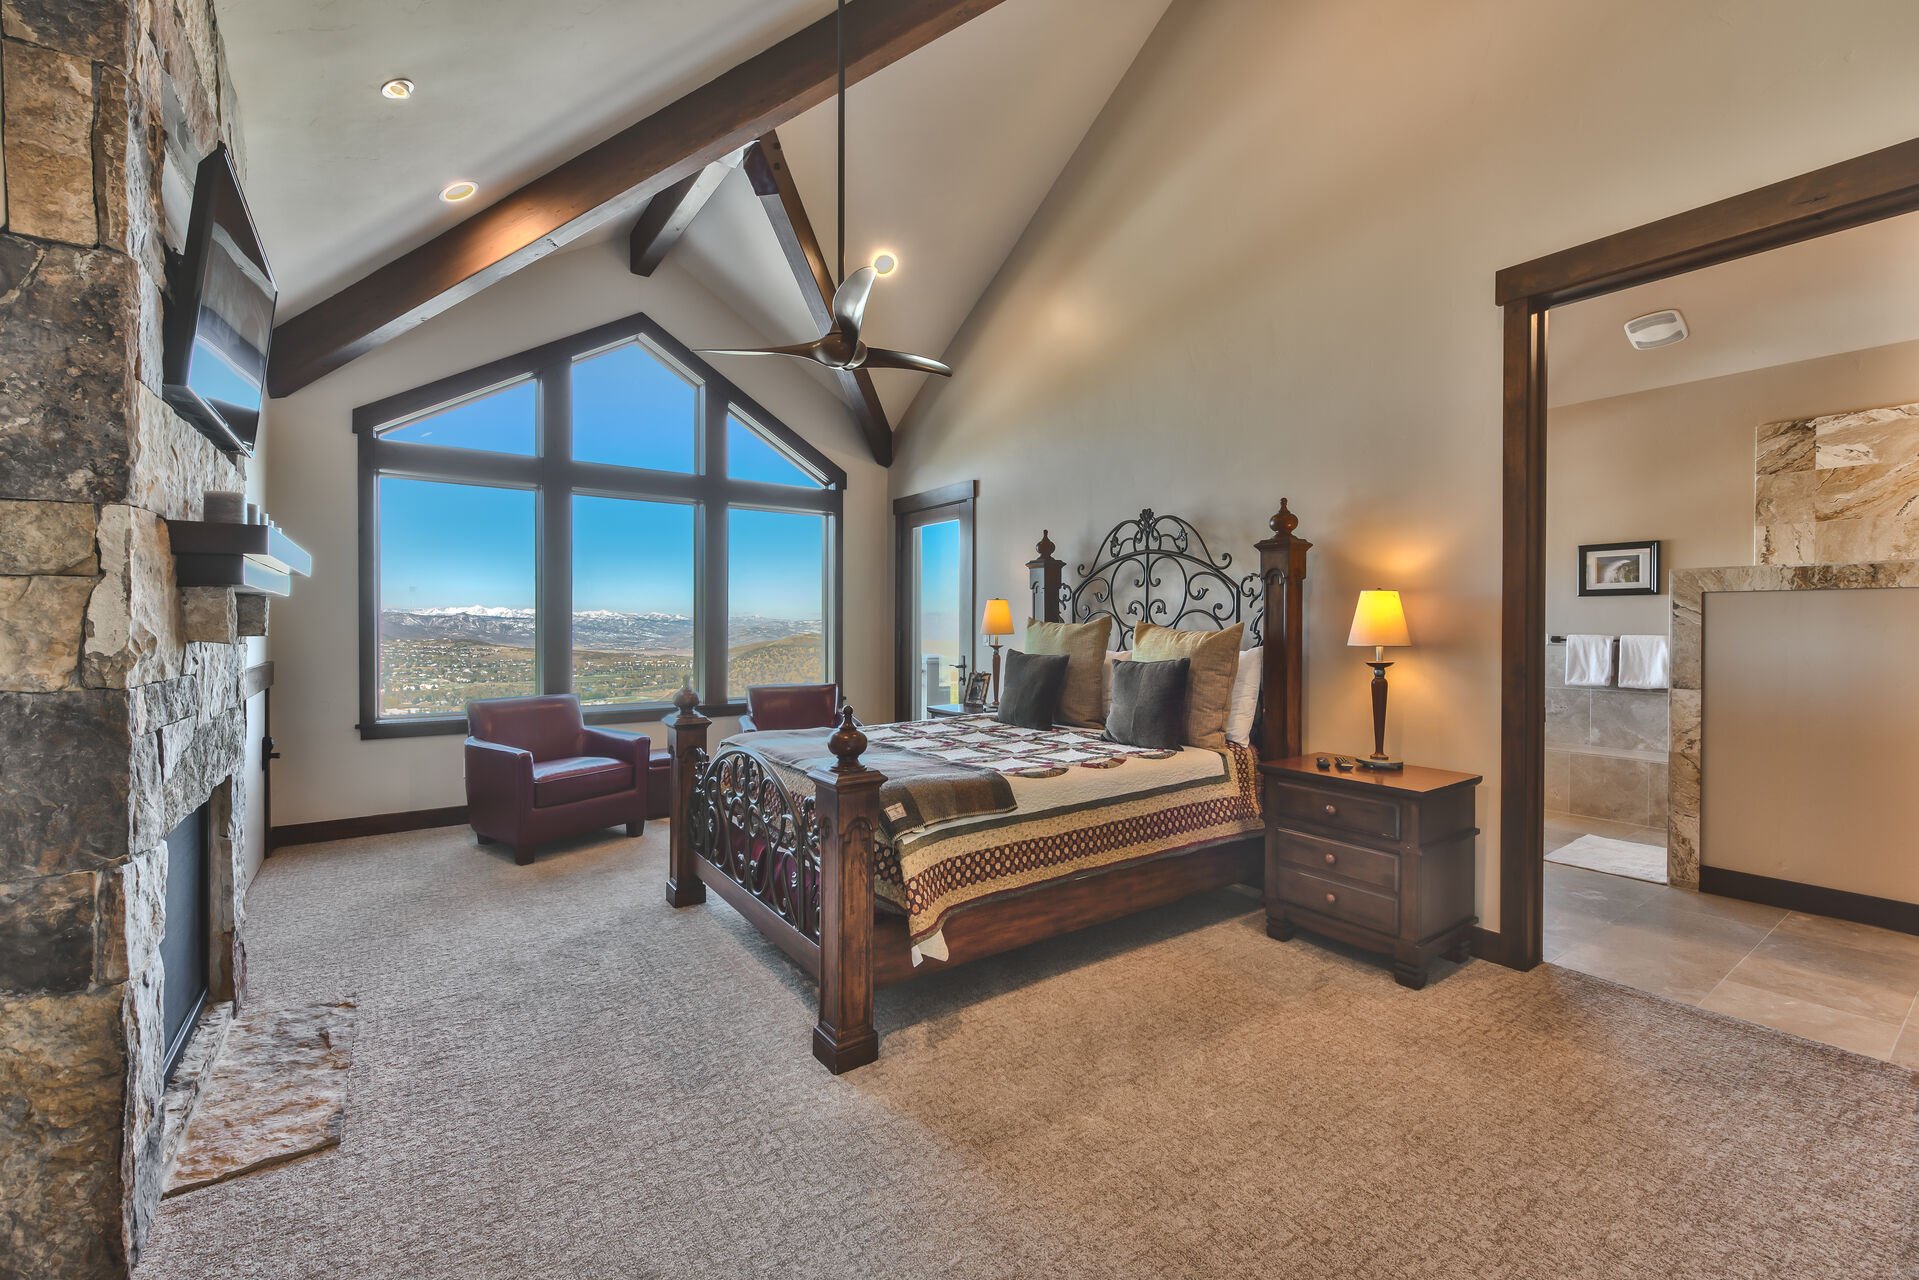 Master Suite 2 has a King Bed, a Large Walk-in Closet with a Twin Day Bed and Twin Trundle, Both with Memory Foam Mattresses, a Private Bath and Patio, and Stunning Views